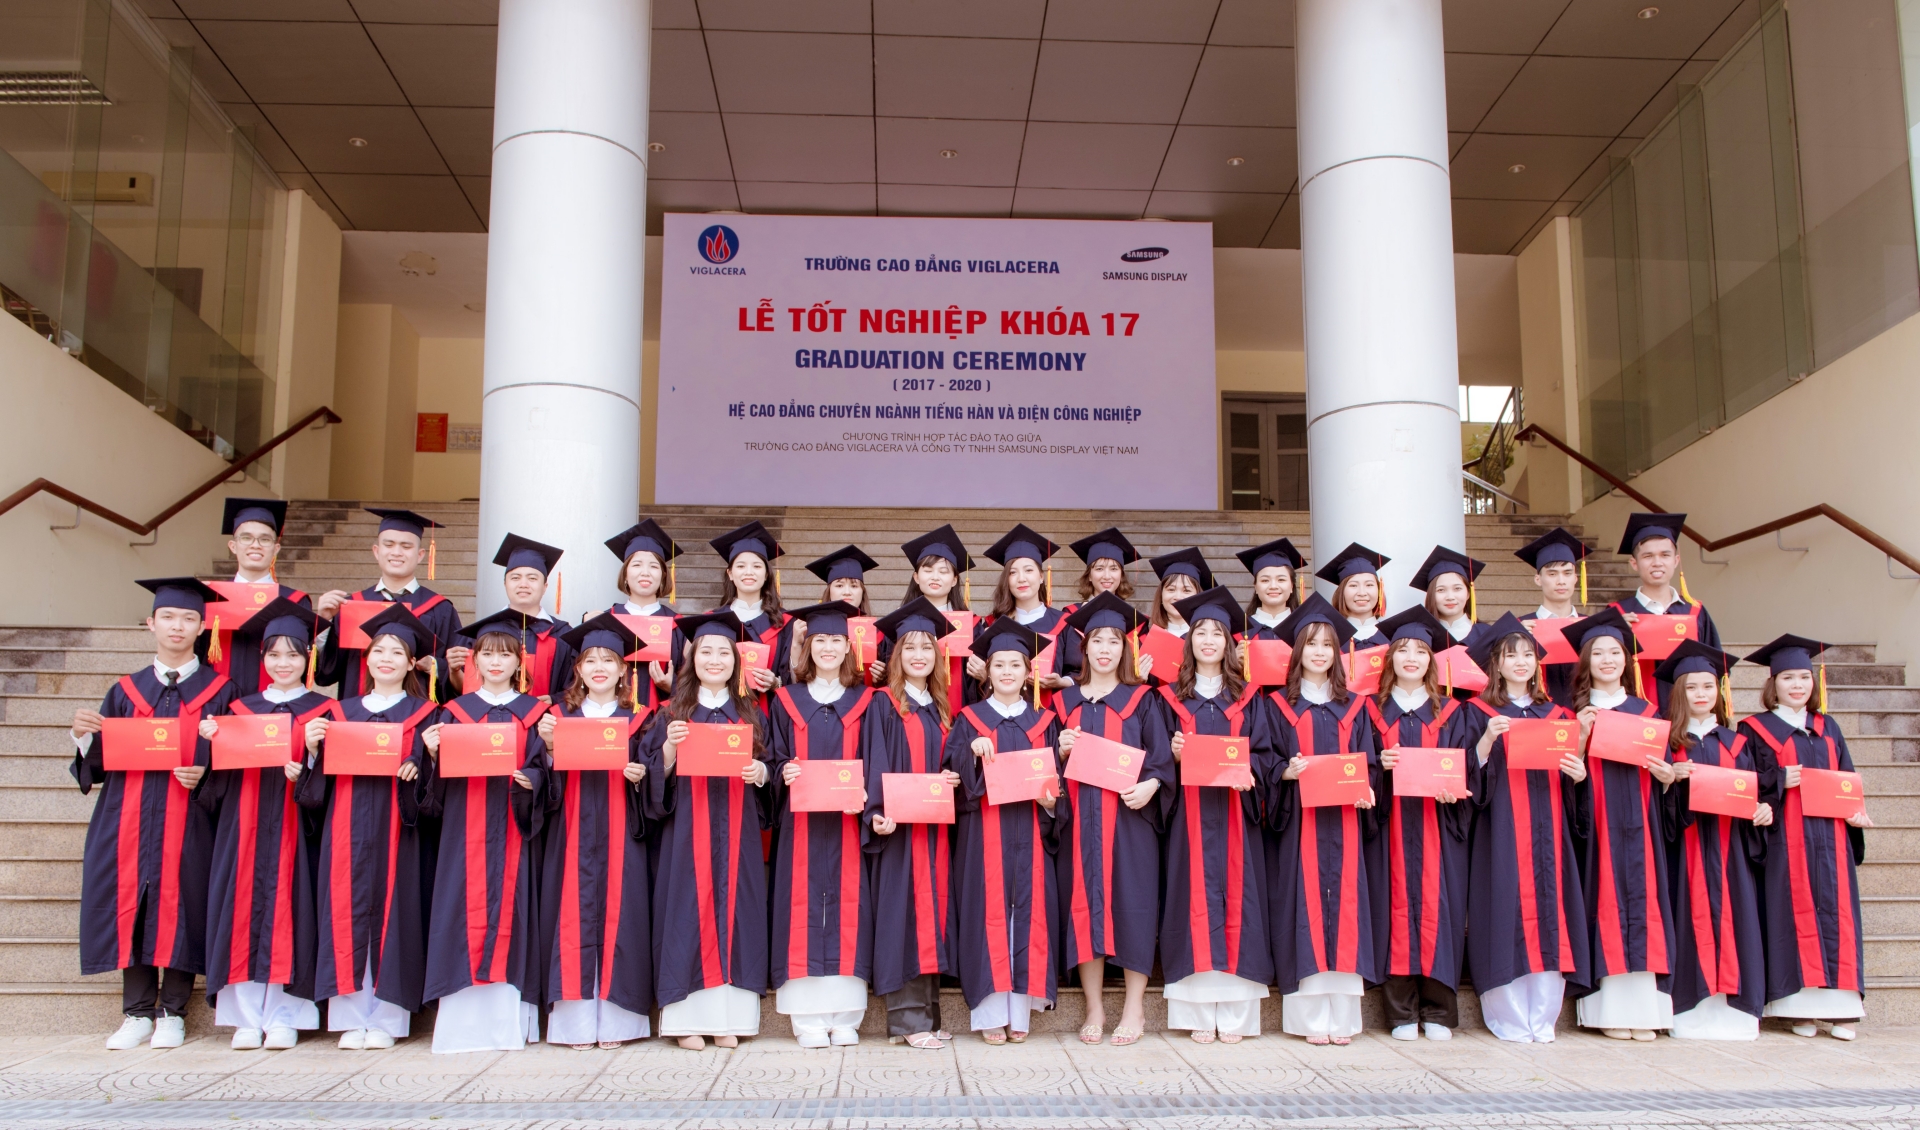 Viglacera College held the Graduation Ceremony for 17th course students